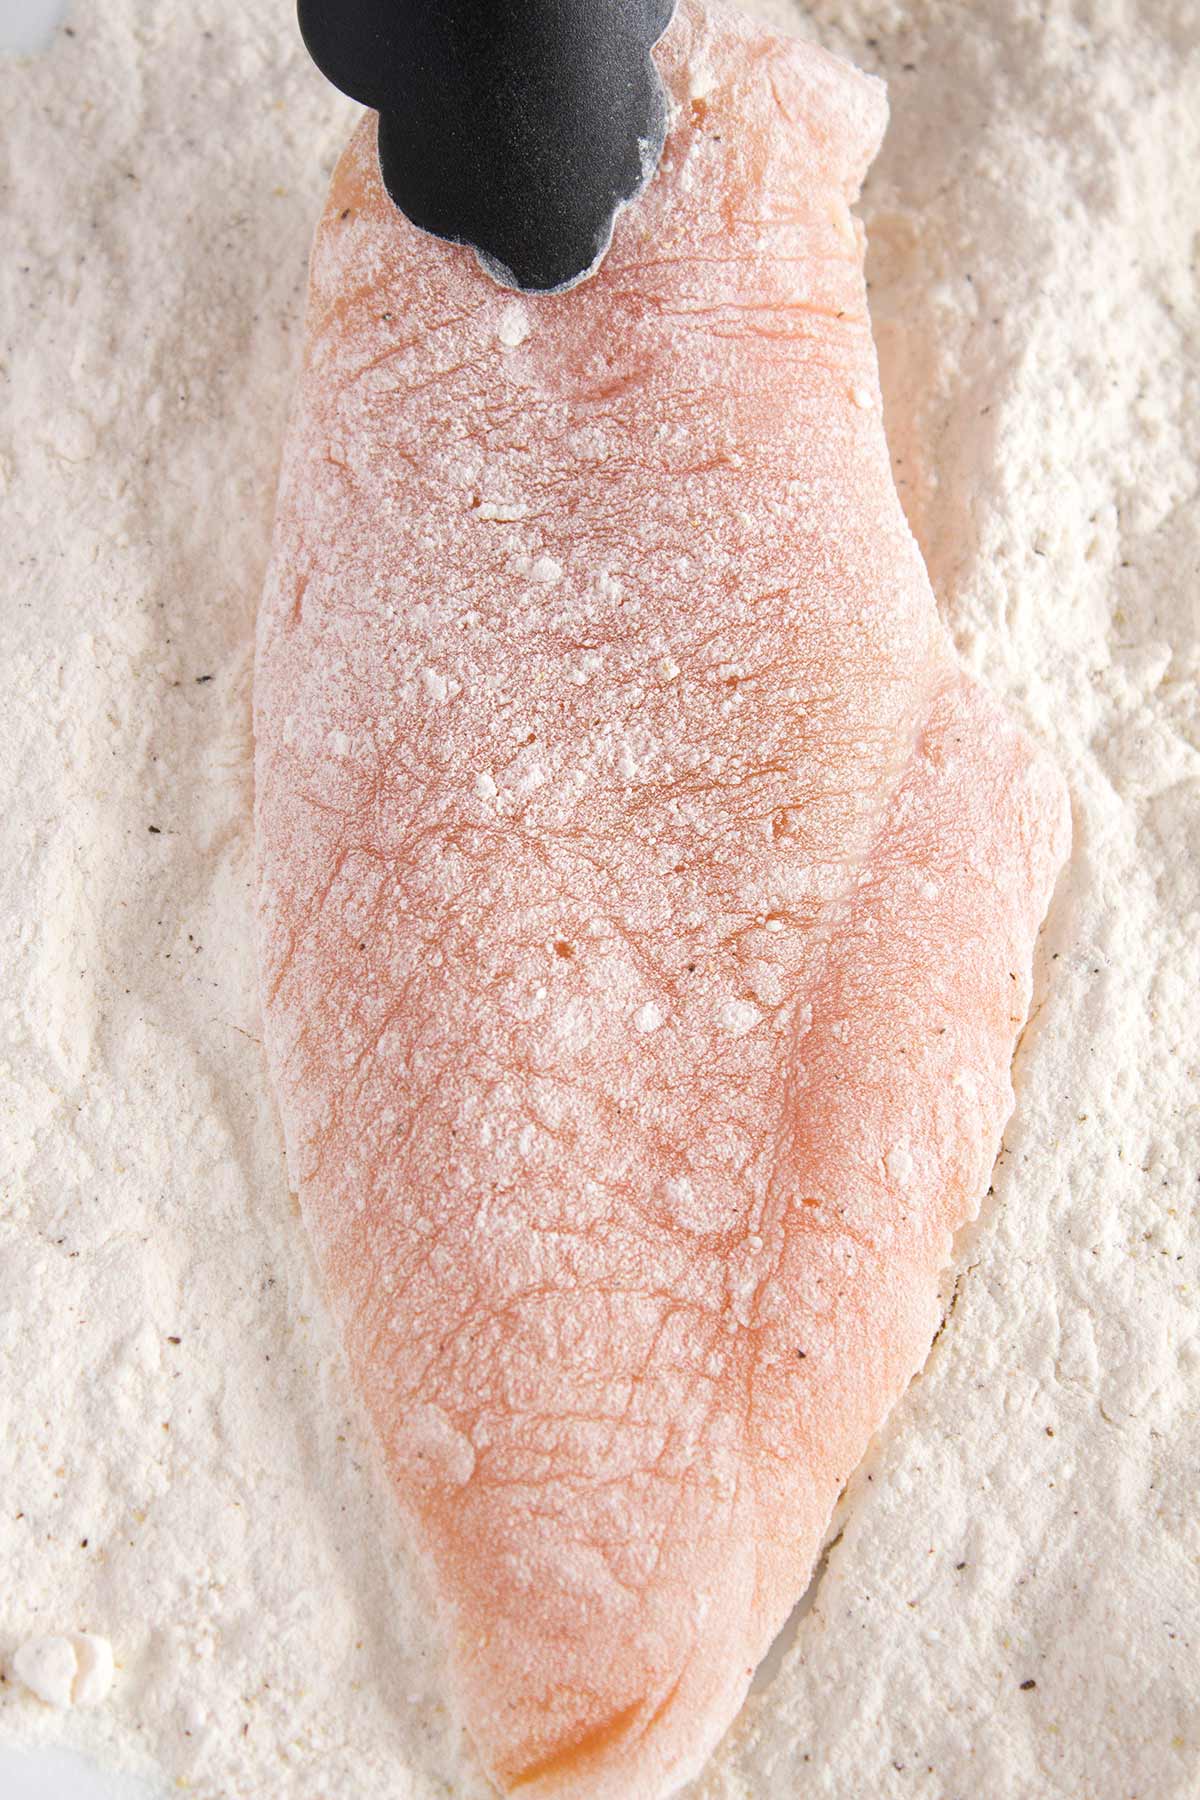 Raw chicken breast lightly coated in flour.